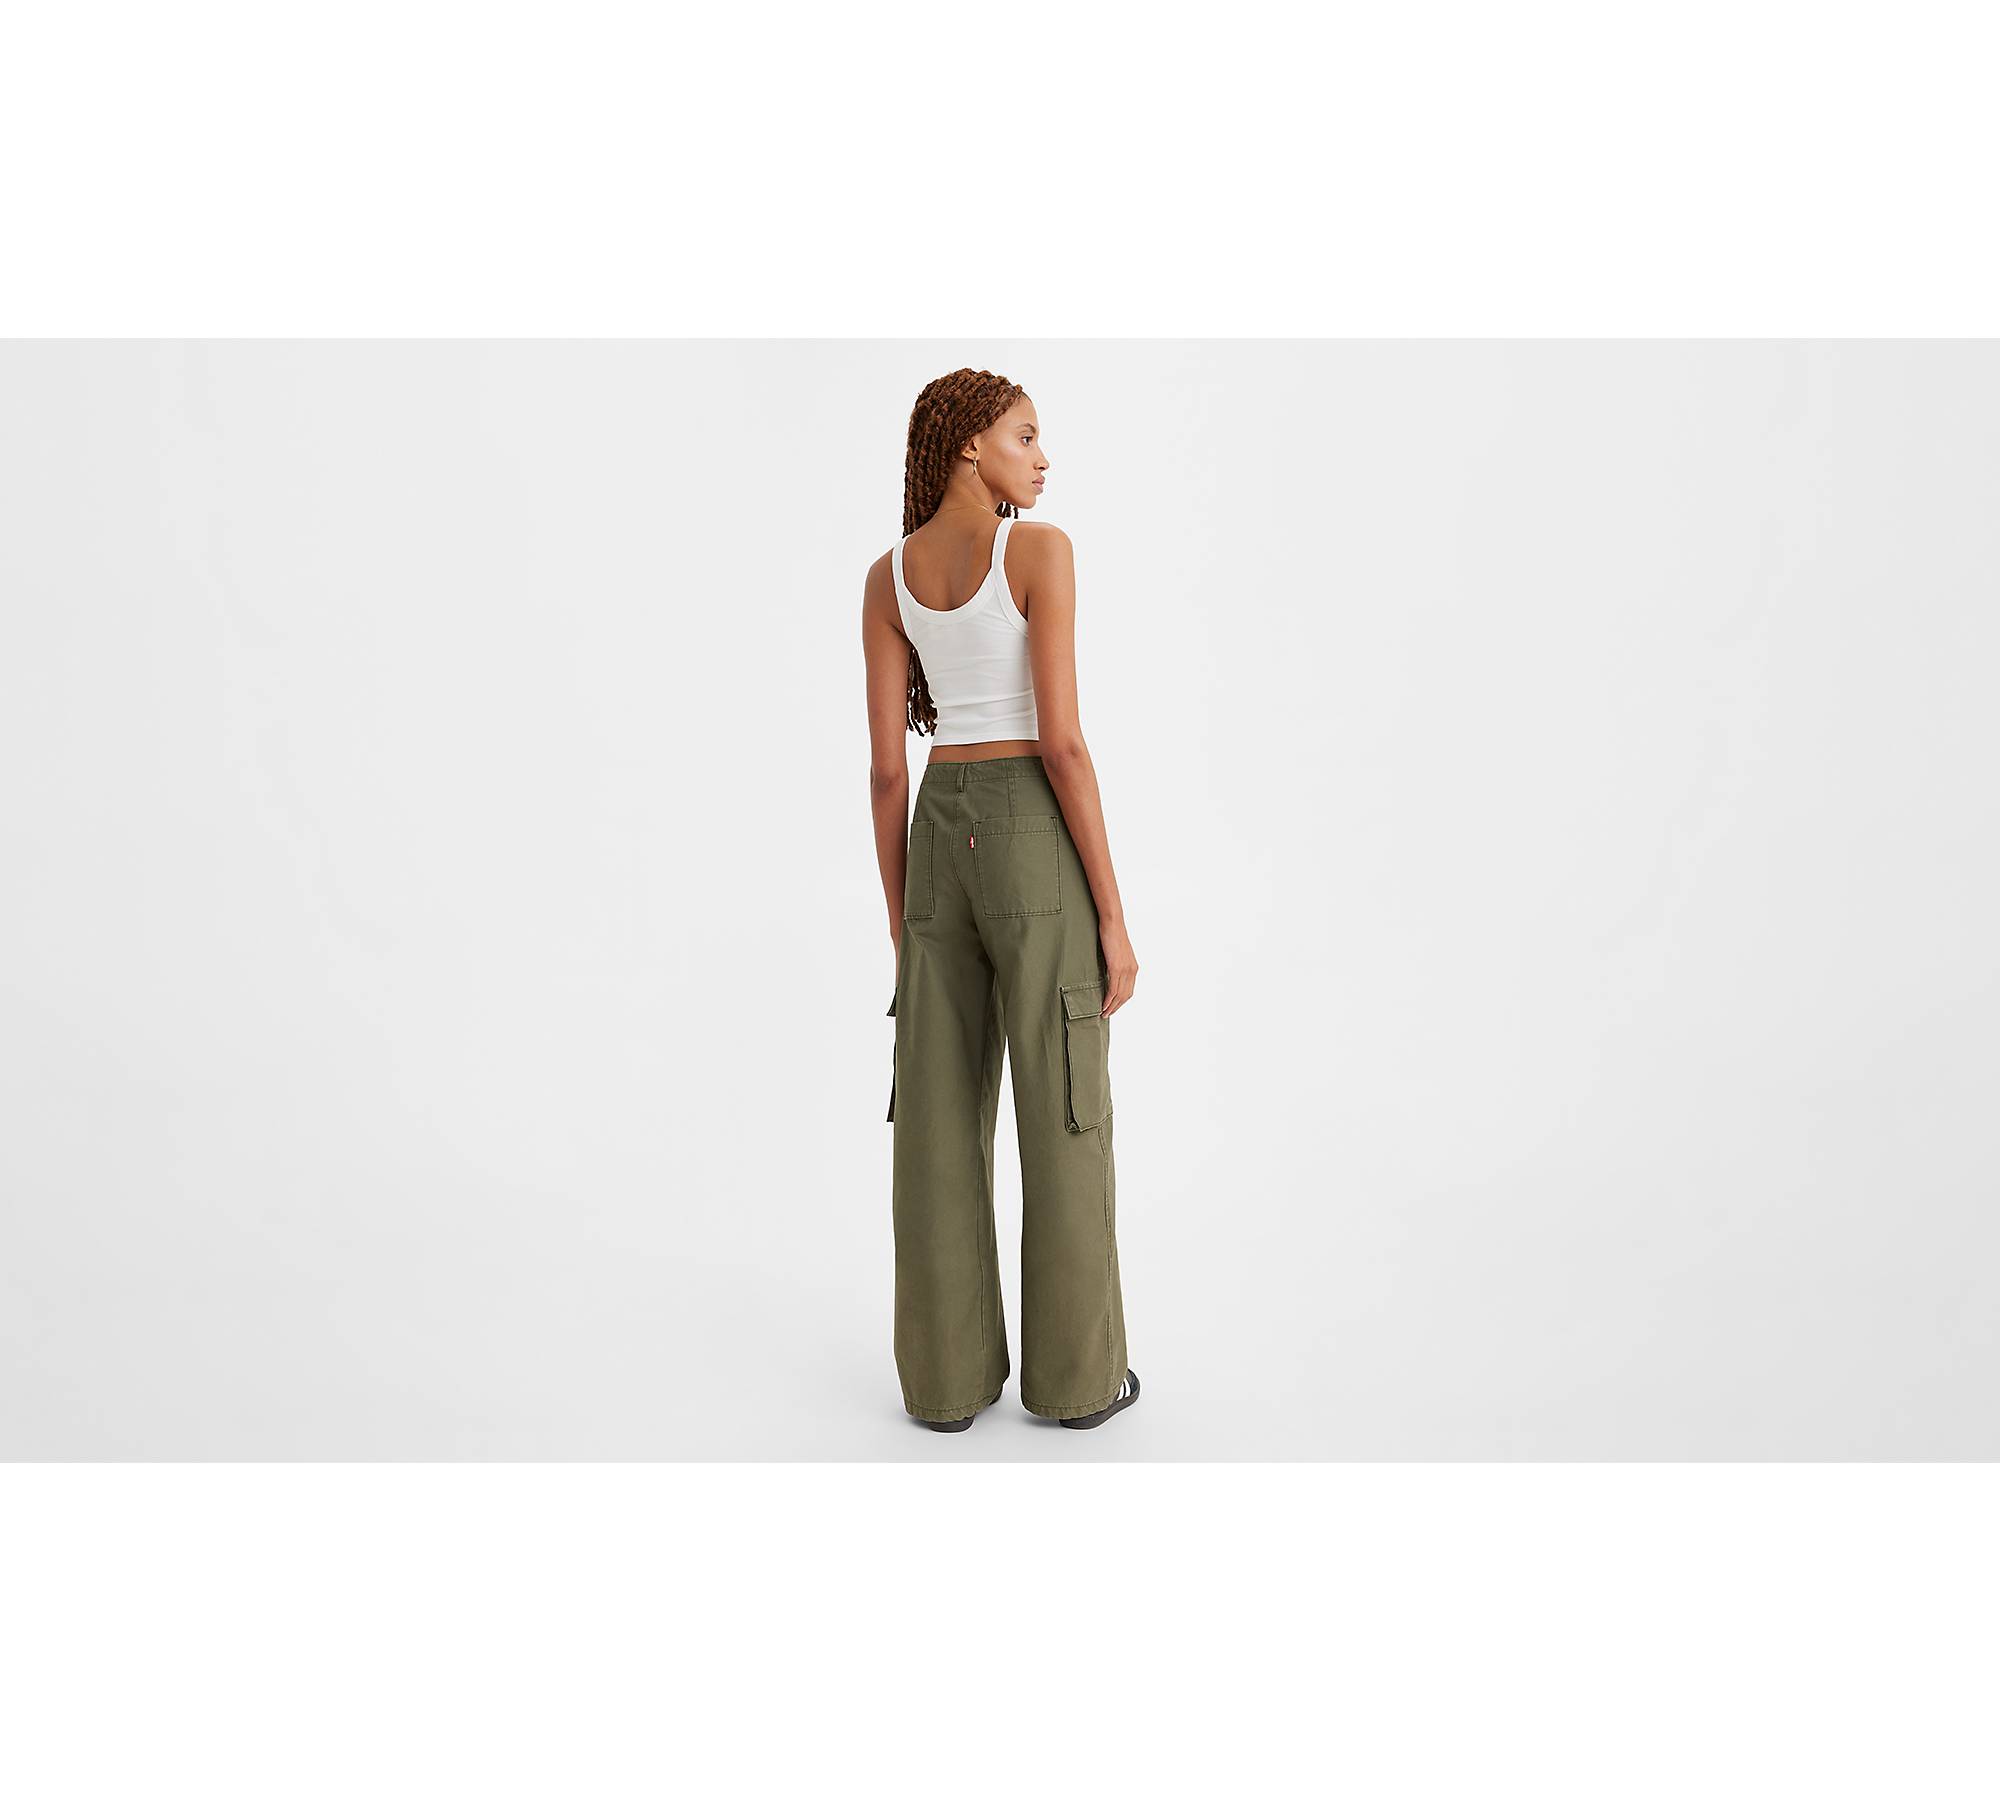  Mnyycxen Solid Cargo Pants for Women Loose Fit Comfy